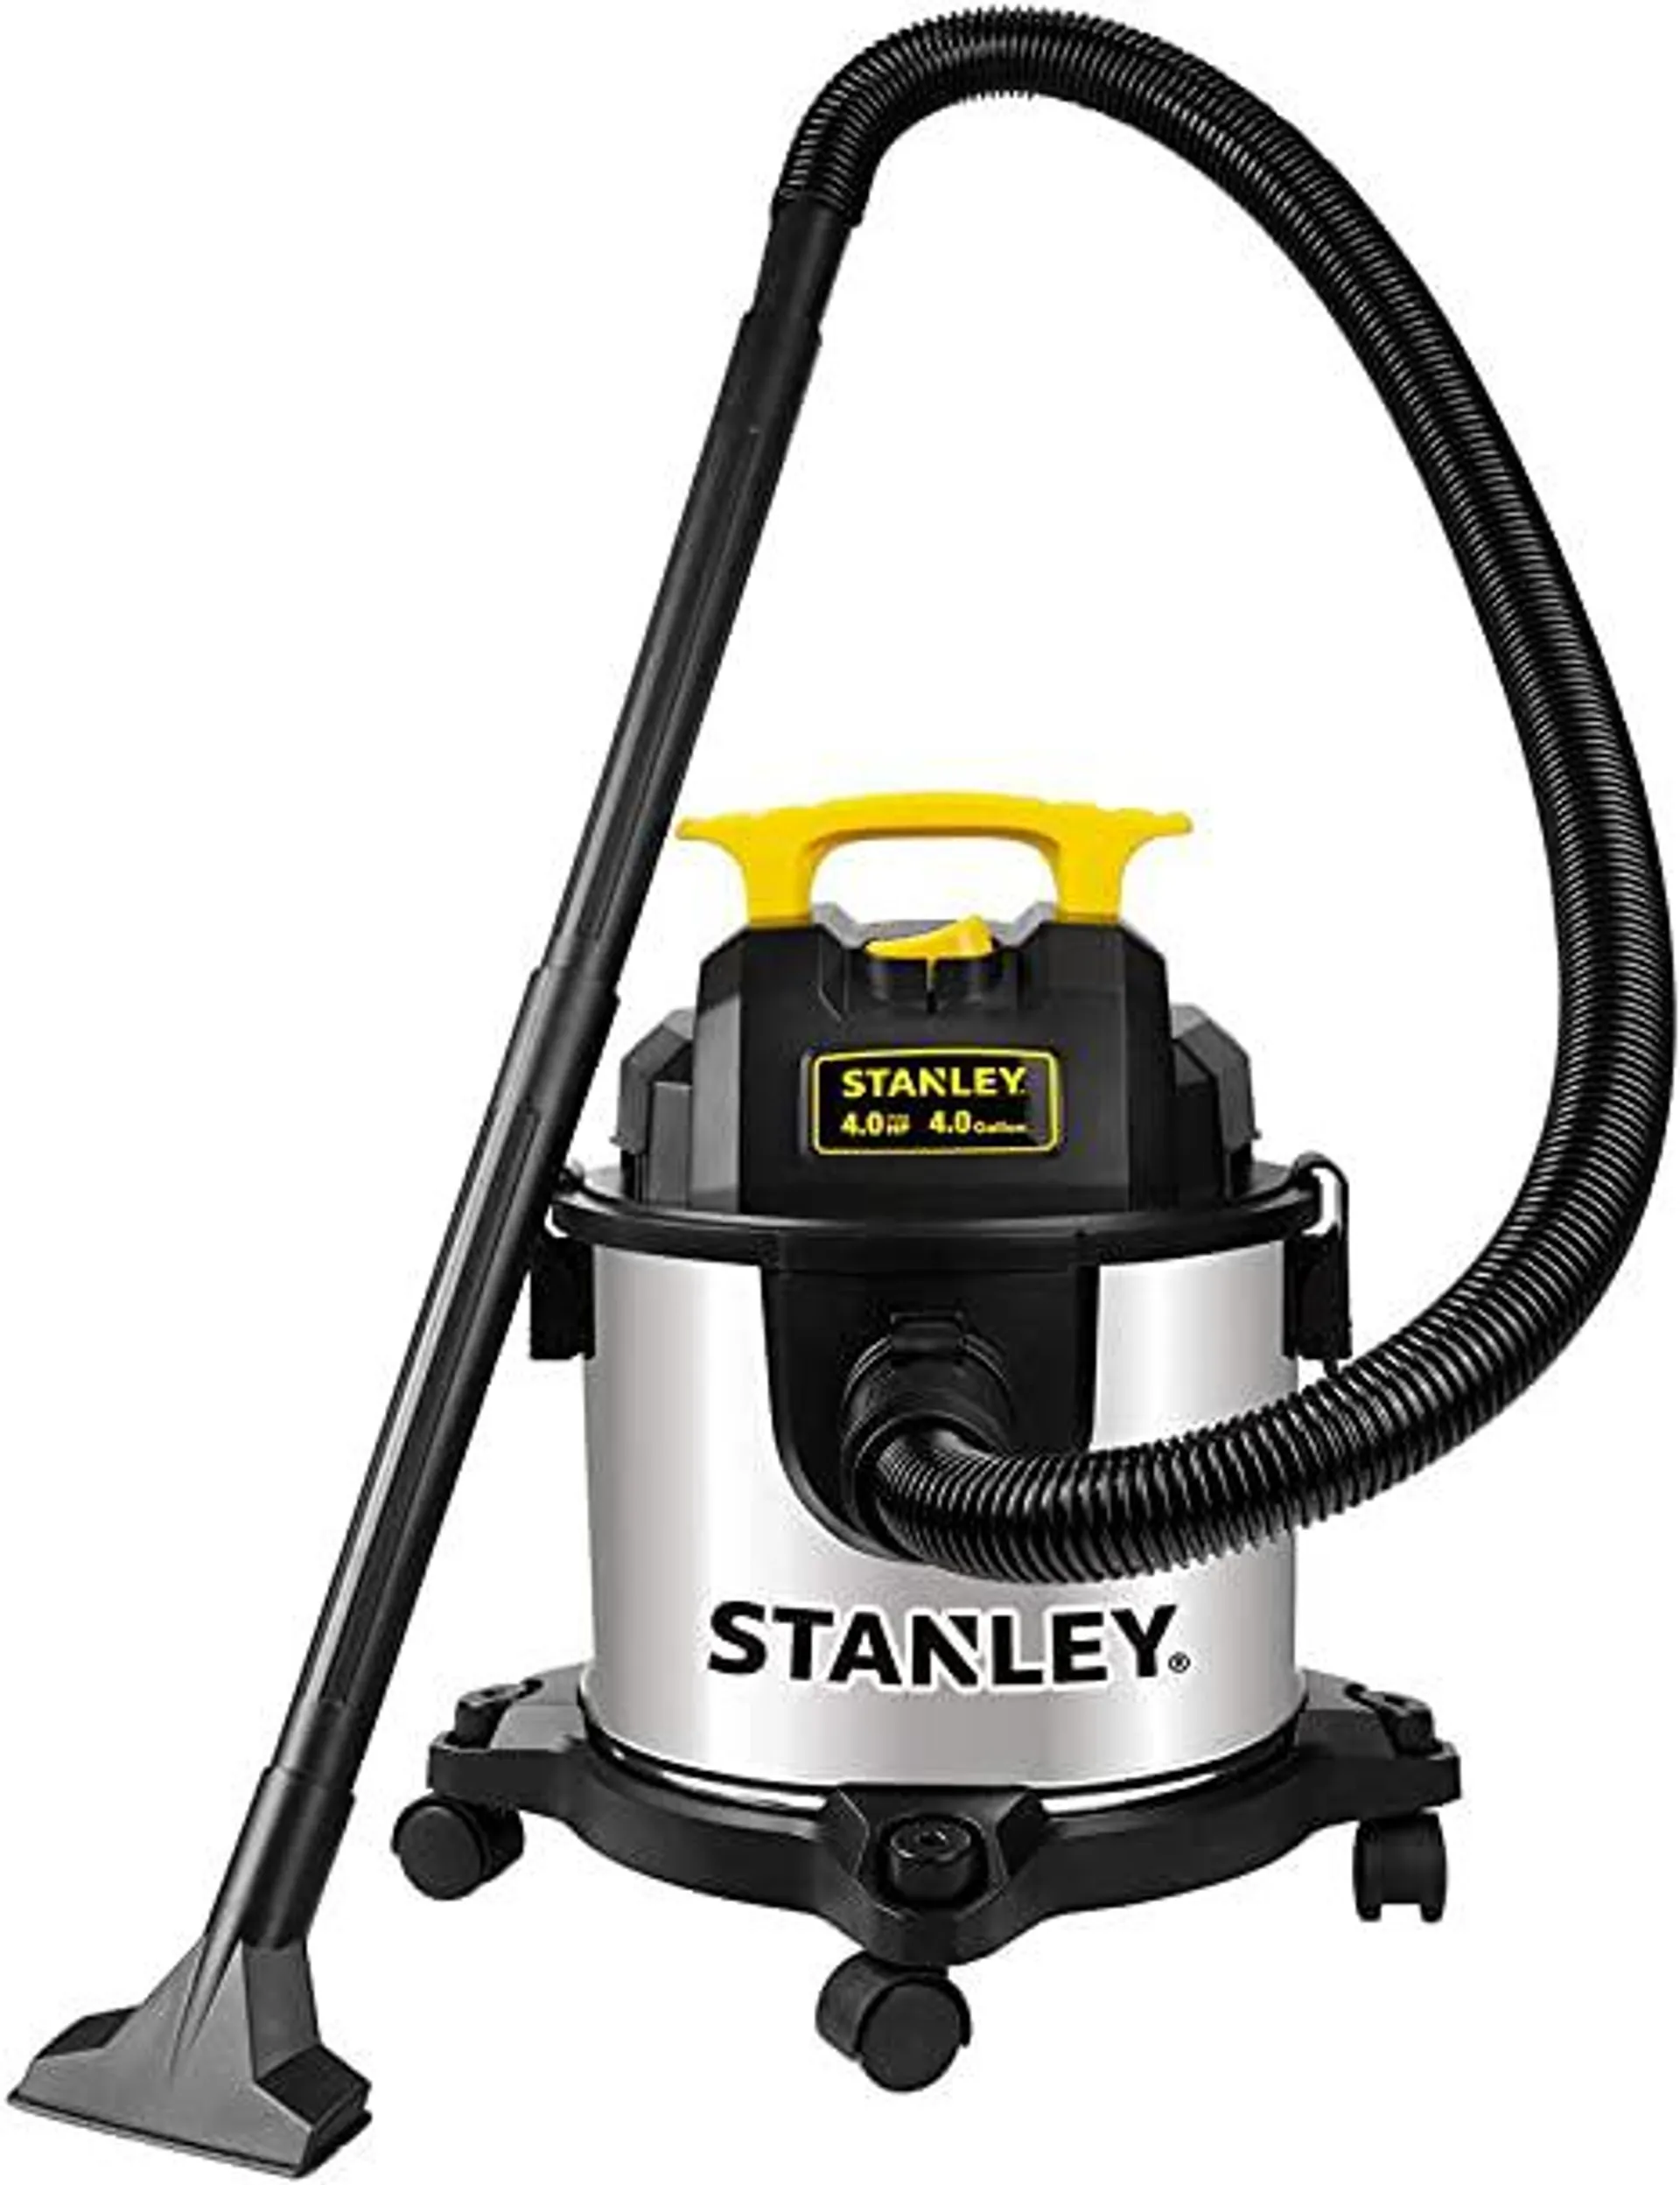 Stanley 4 Gallon Wet Dry Vacuum, 4 Peak HP Stainless Steel 3 in 1 Shop Vacuum Blower with Powerful Suction, for Job Site, Garage, Basement, Model: SL18301-4B